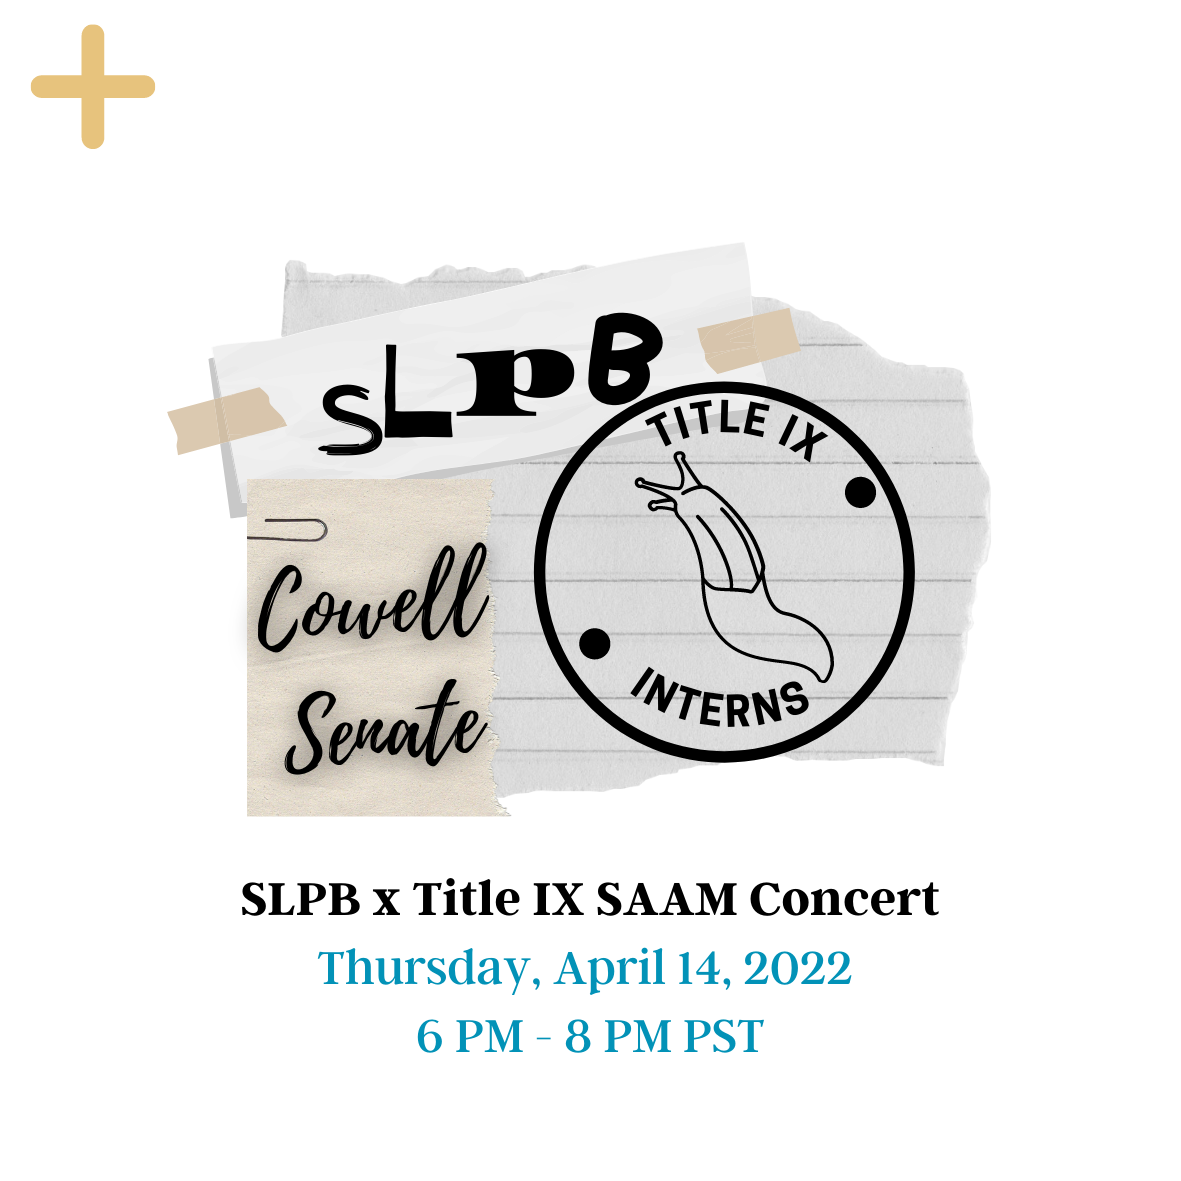 SLPB/SAAM Concert cover page with the Title IX Interns logo displayed and SLPB written next to it. Cowell Senate is also written next to the logo The yellow button on the top can be clicked and will provide more information. The picture has date at the bottom: Thursday, April 14, 2022, 6 PM – 8 PM PST